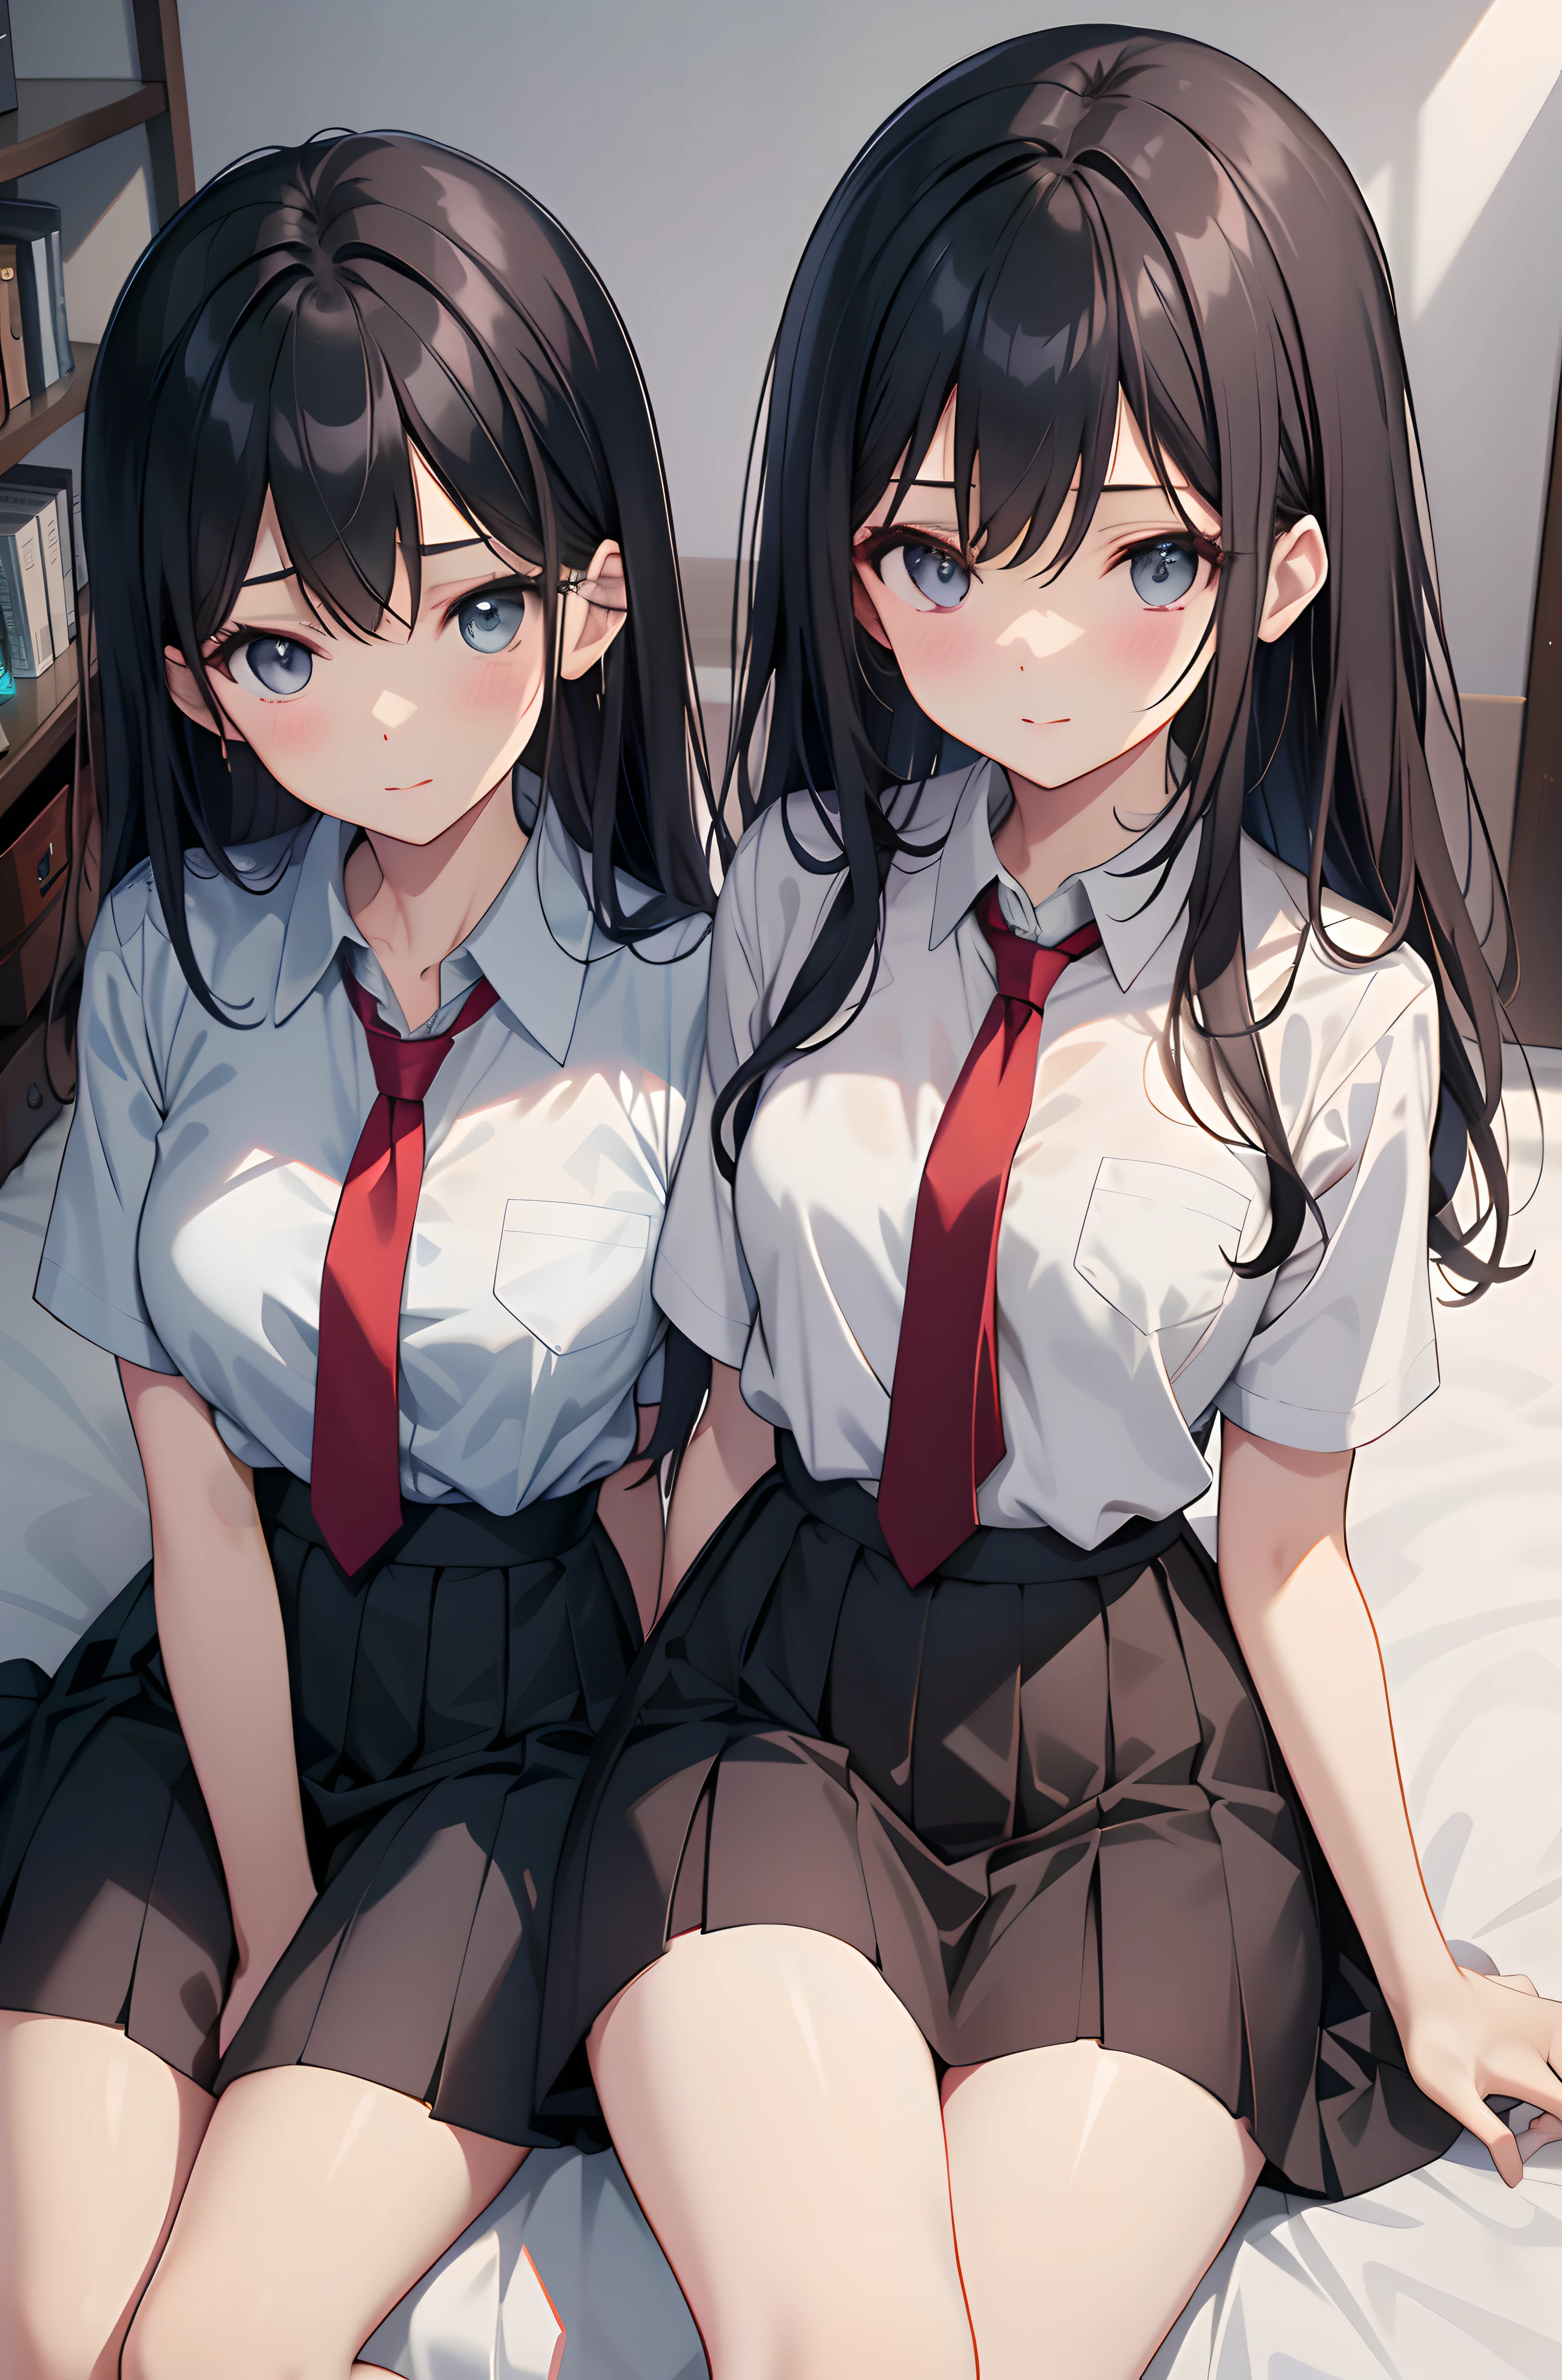 1 beautiful girl, High school students, Cute, medium-sized chest, Perfect eyes, Same eyes, Gal, Medium-length black hair instead of short,,,、Vivid color illustrations、Beautiful face、Kamimei、full body seen、on the beds、White shirt with short sleeves、Black skirt、red necktie、in a high 、sitting on、a beauty girl、Beautiful fece、quadratic element、Light Novel Heroine、original intention、